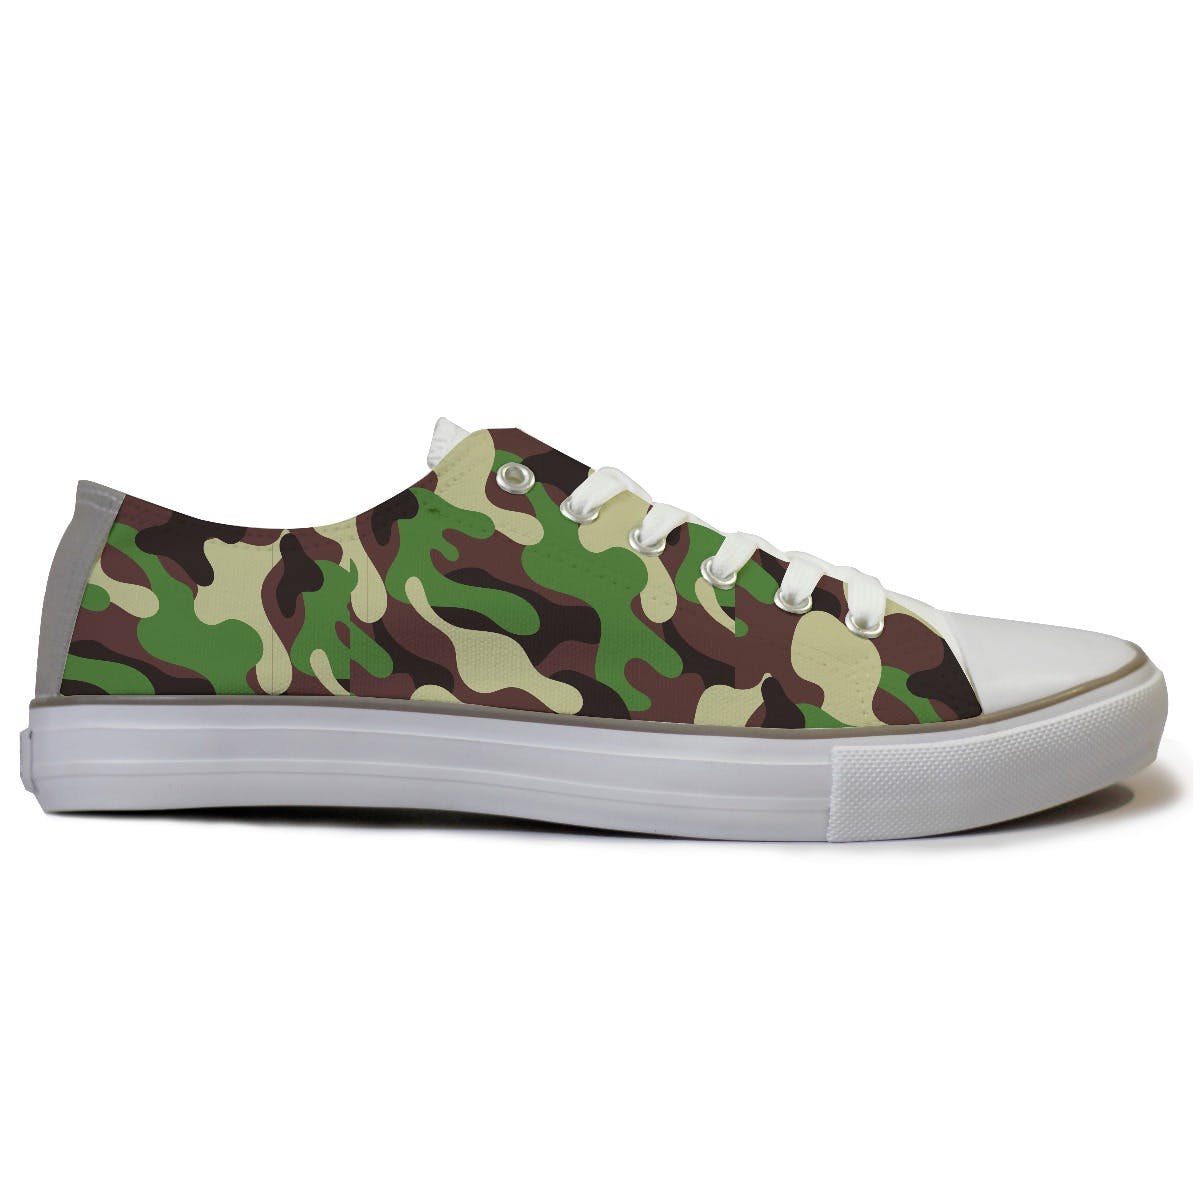 Converse All Star Low Top Camouflage Sneakers | Converse all star, Sneakers,  Converse